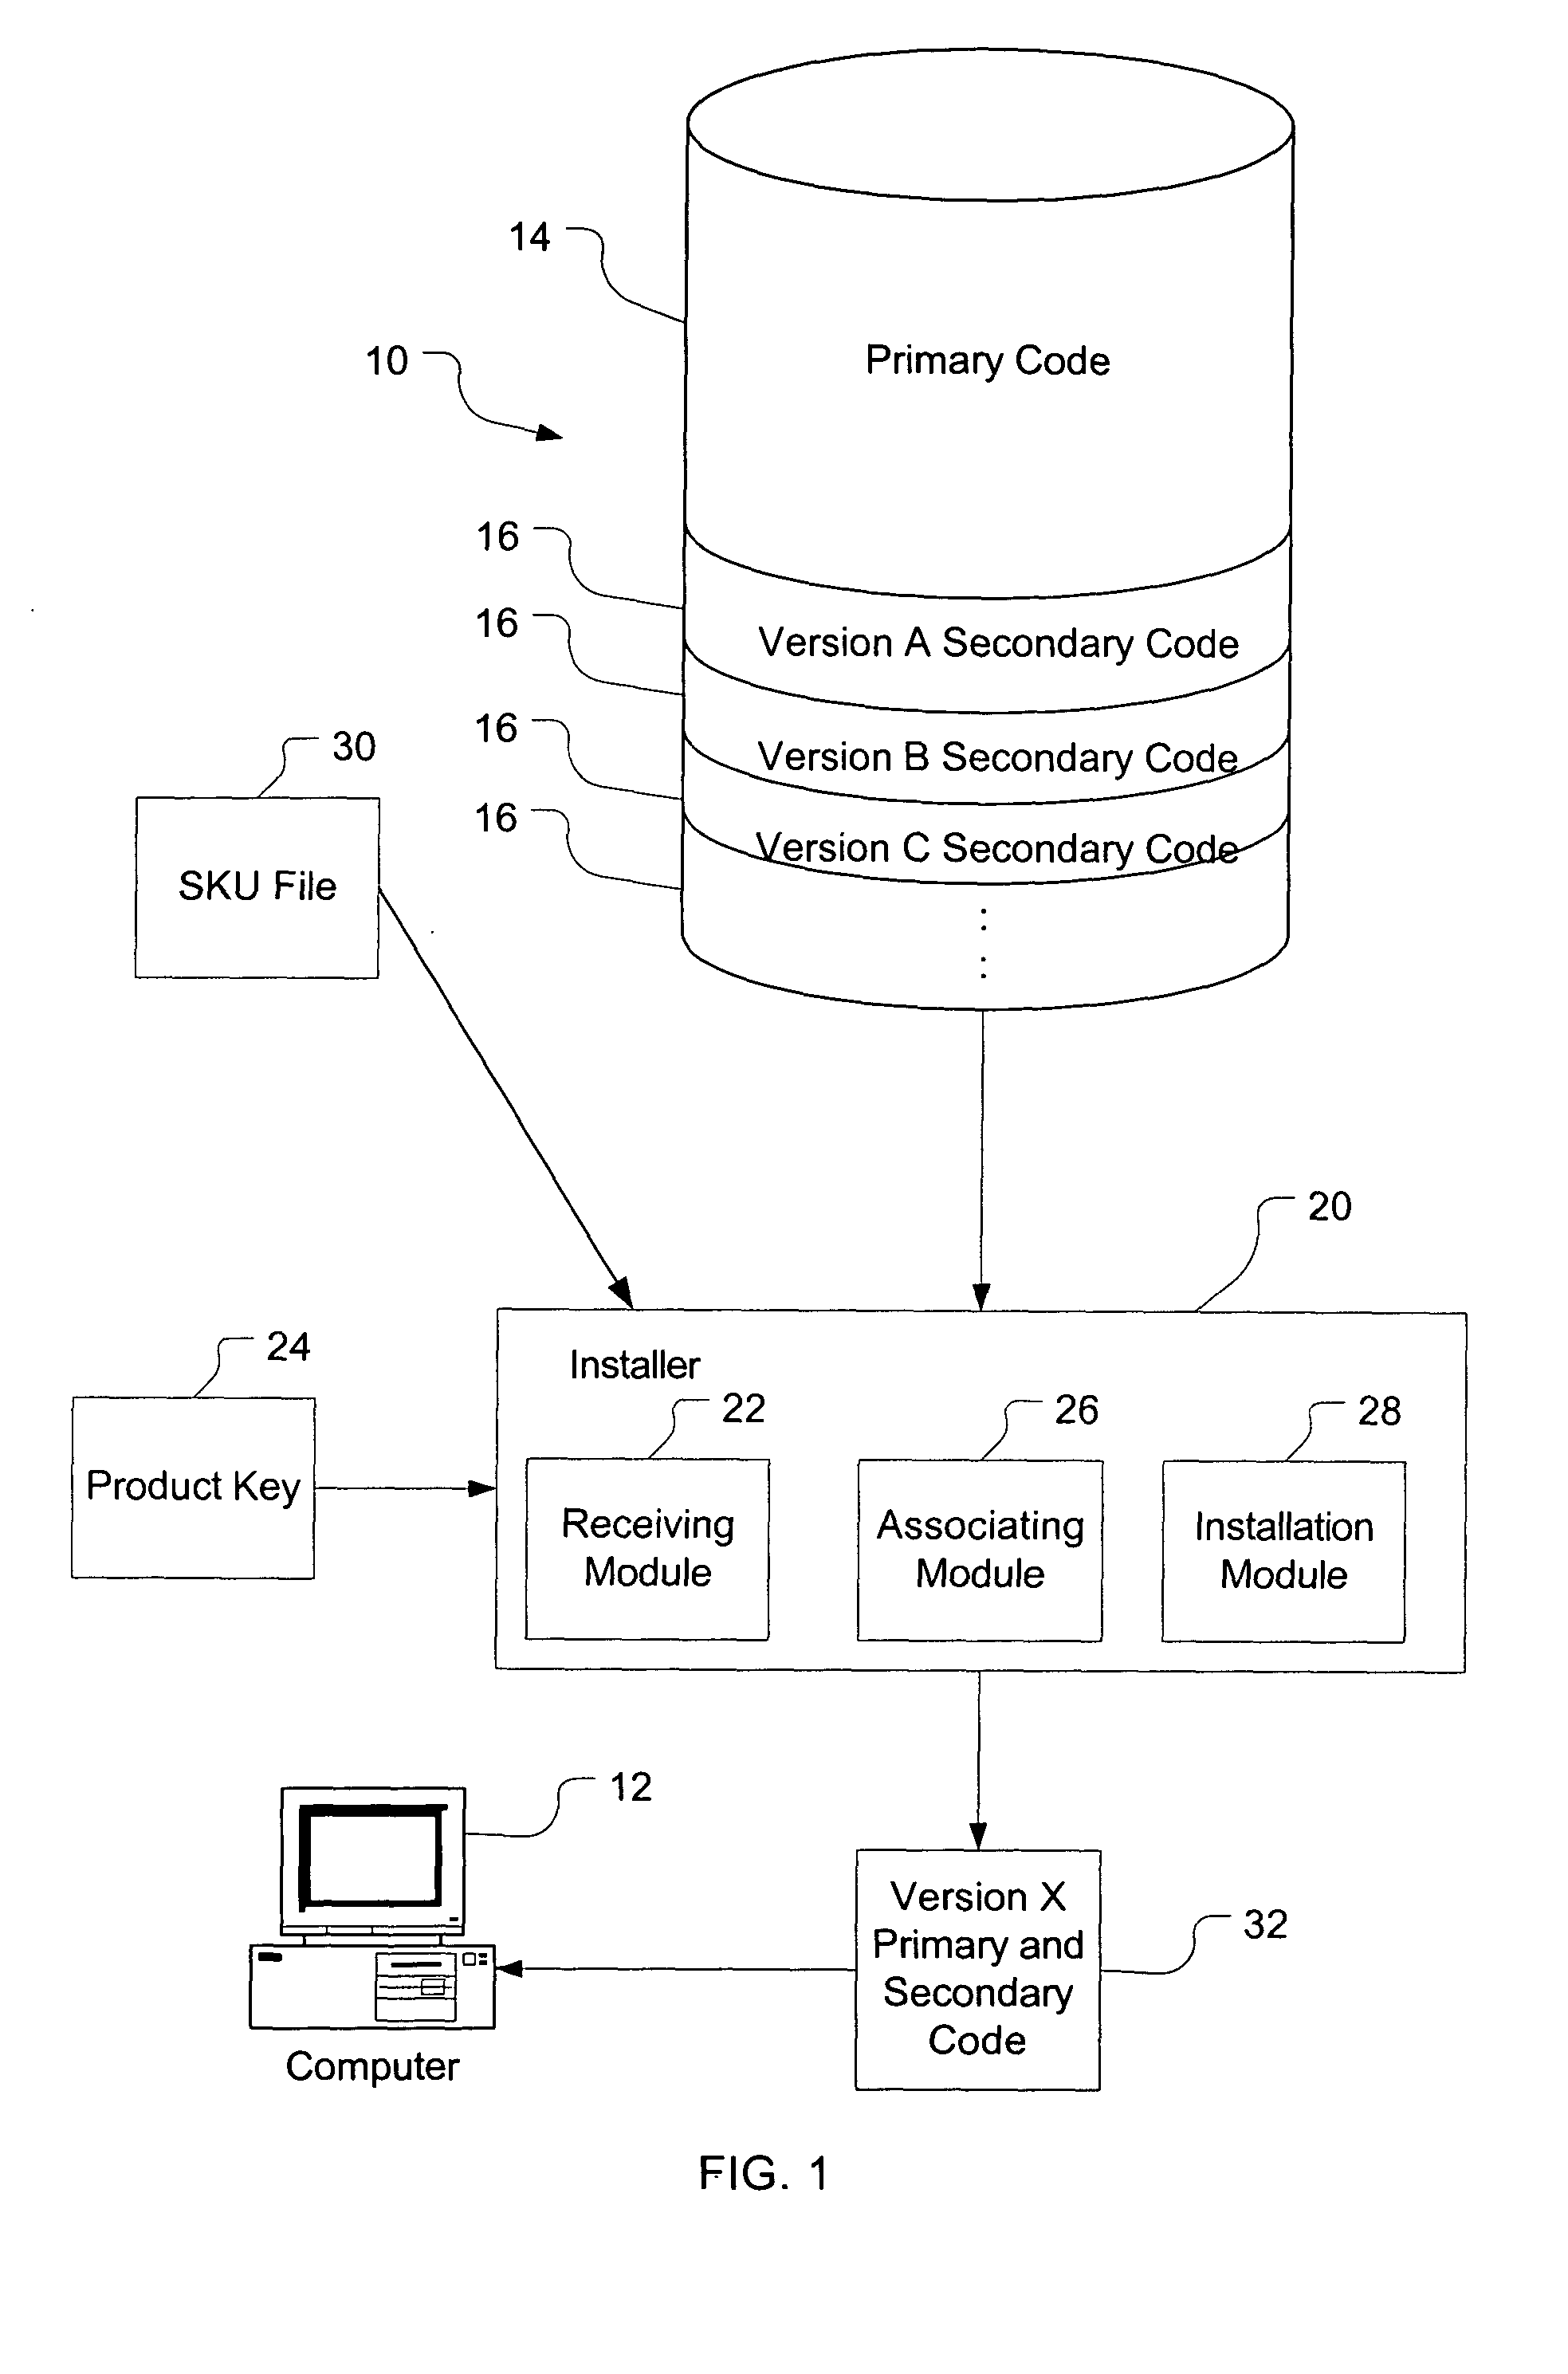 Method and system for distributing and installing software